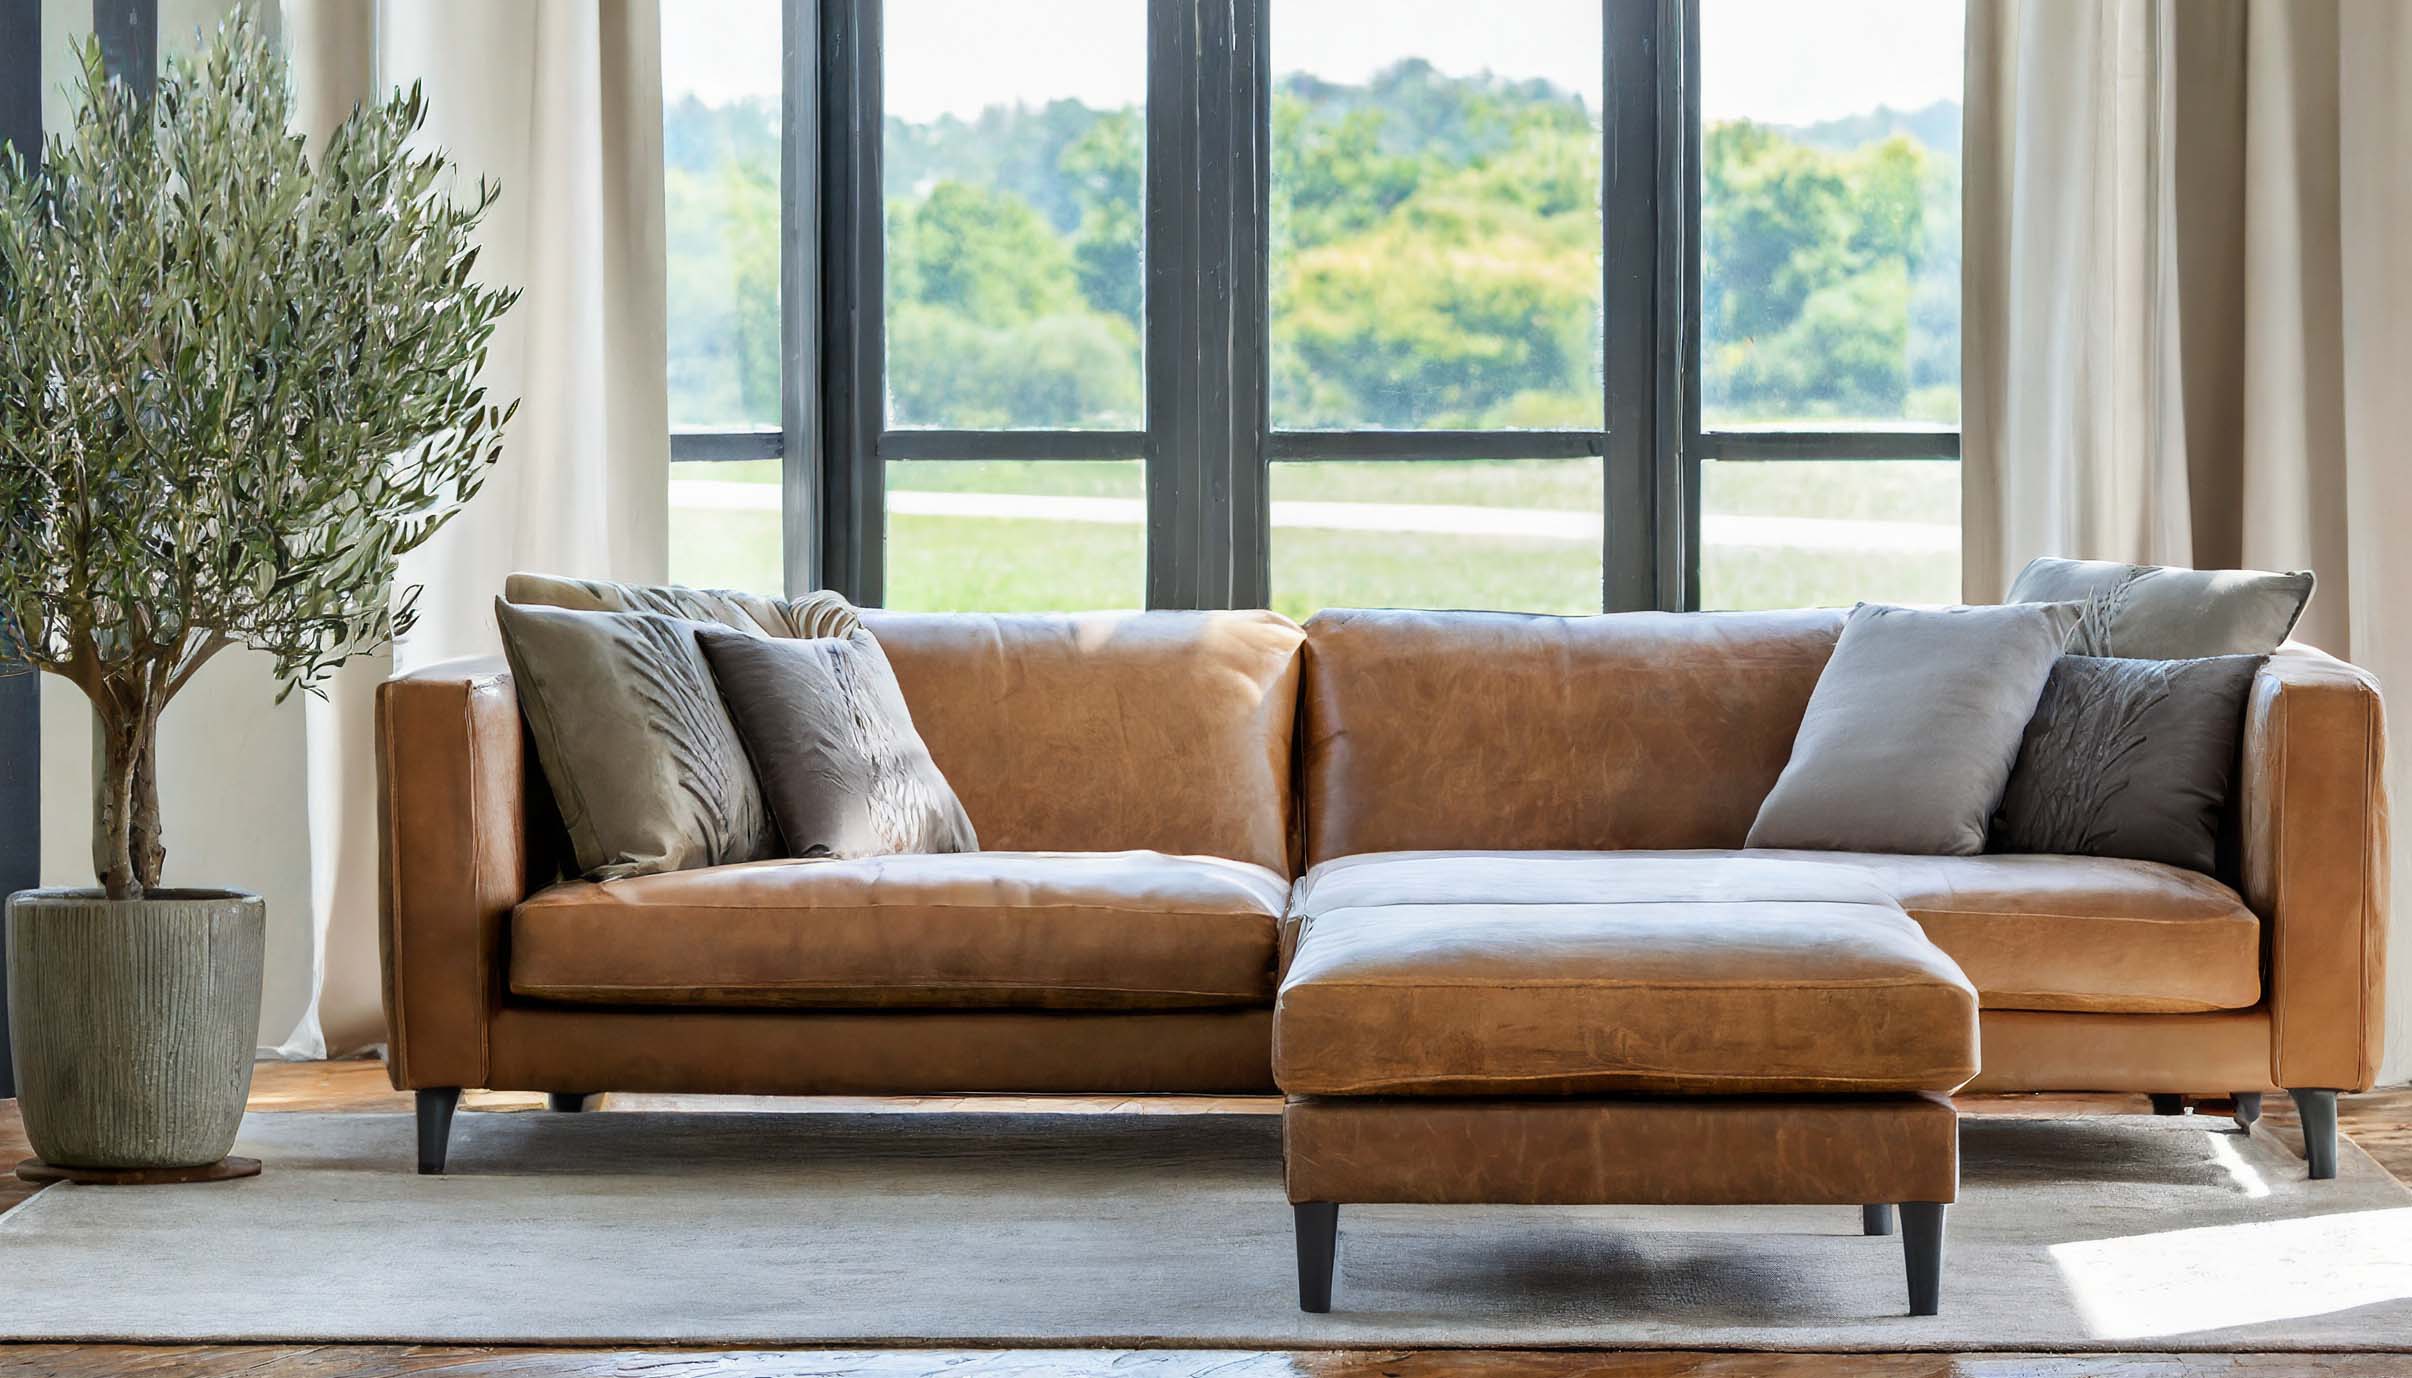 Leather sofa with pillows, olive tree, gray area rug, in front of living room window.